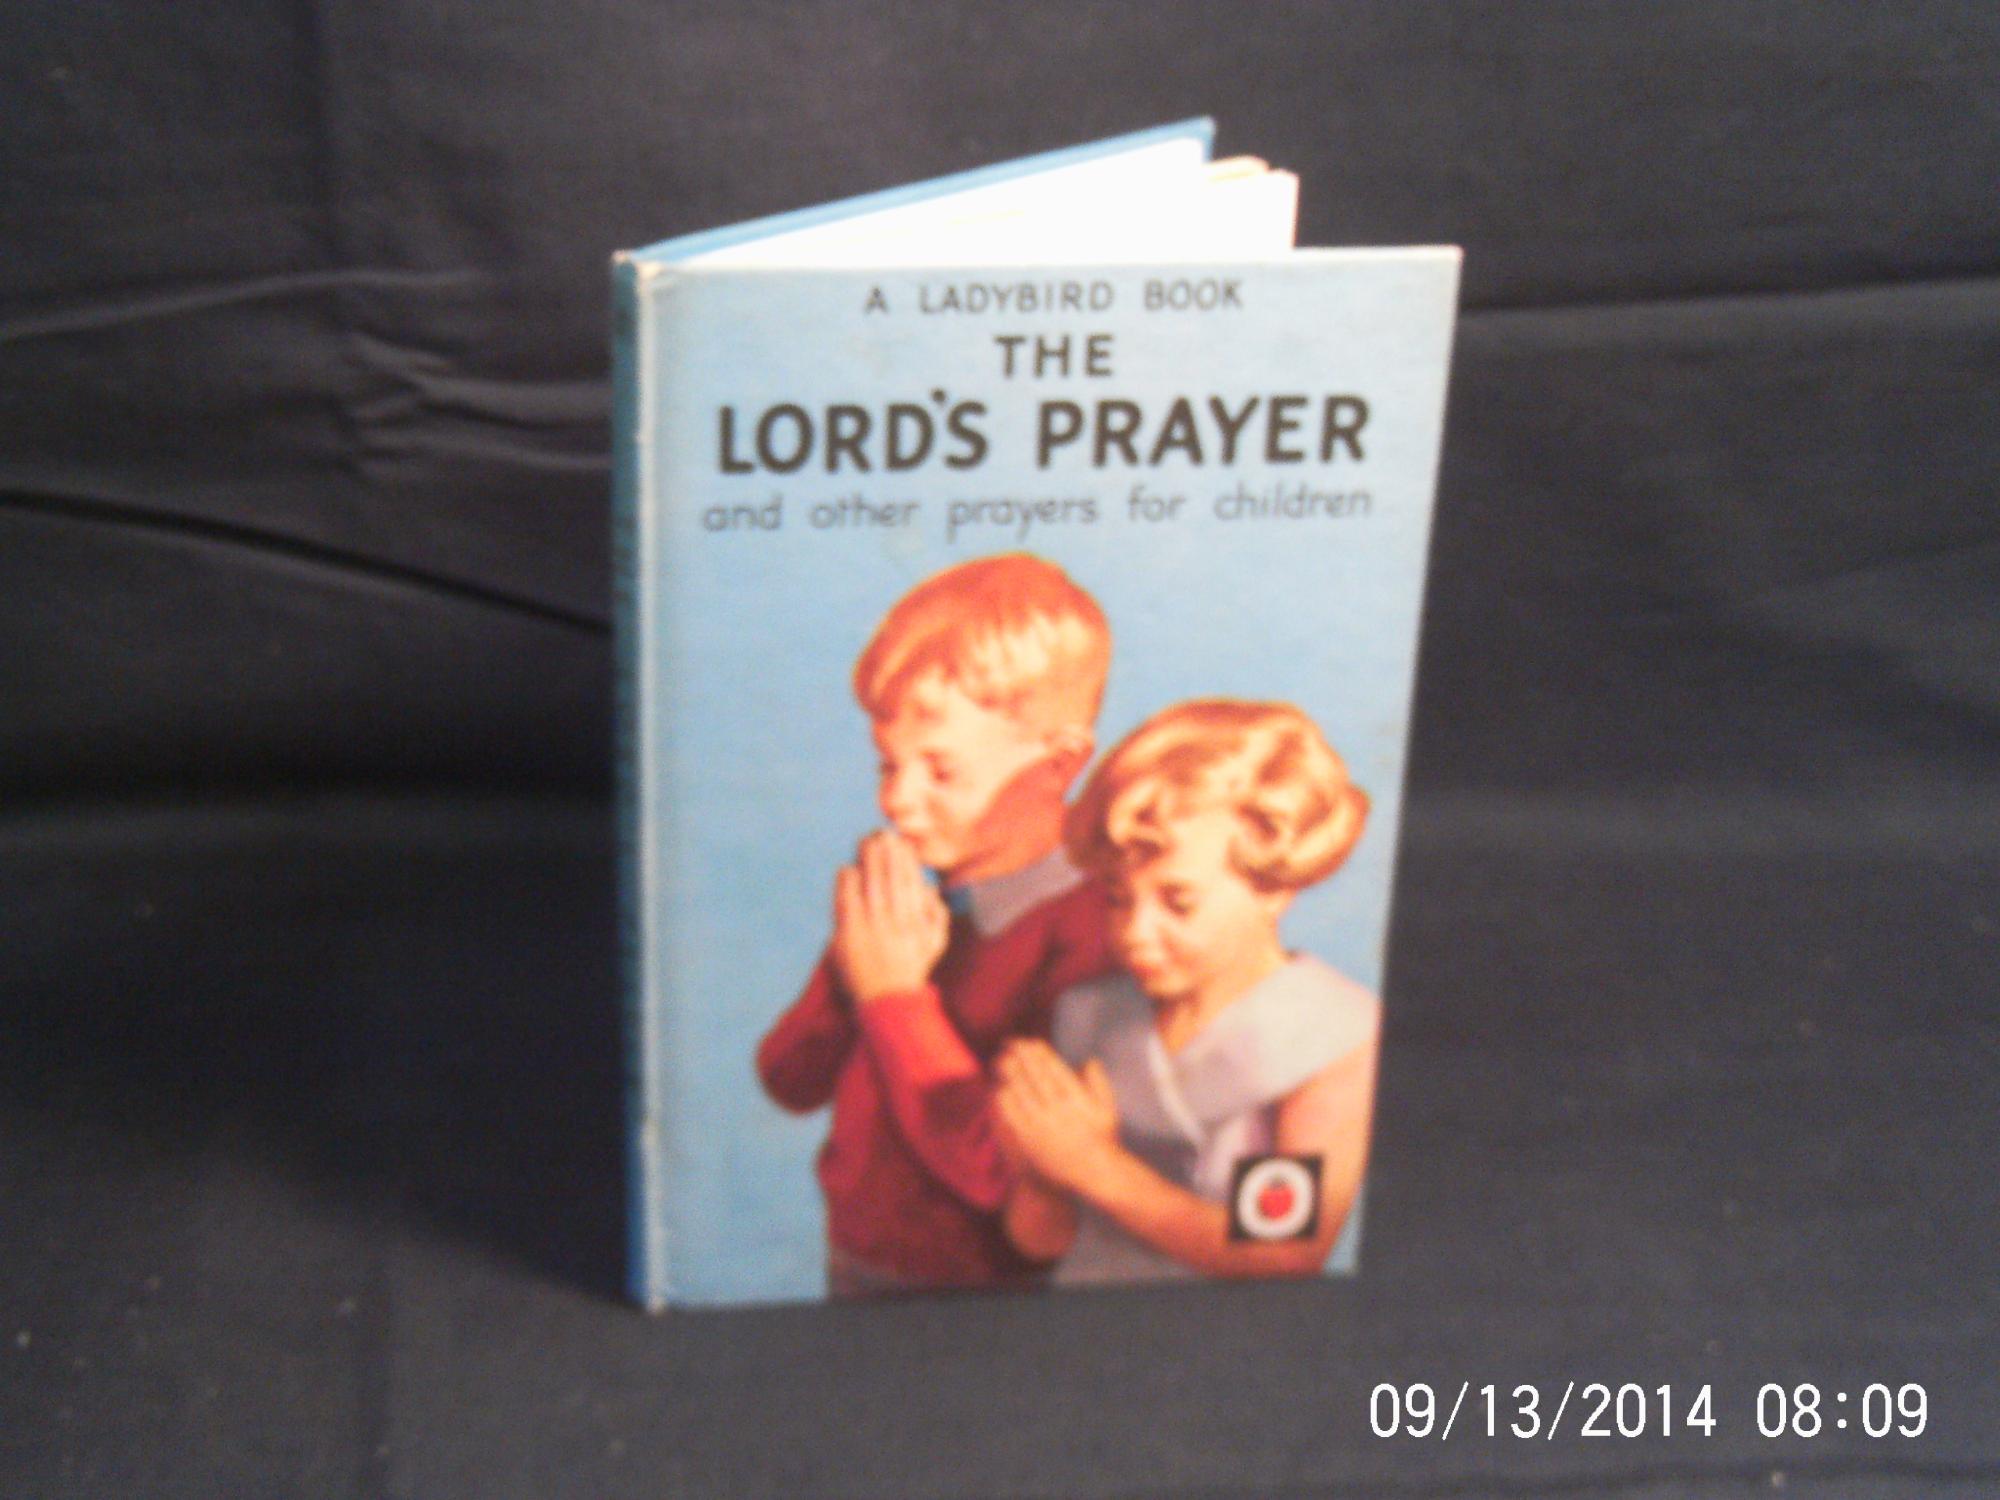 The Lord's Prayer and Other Prayers for Children - ROSTRON Hilda I. (compiled by)